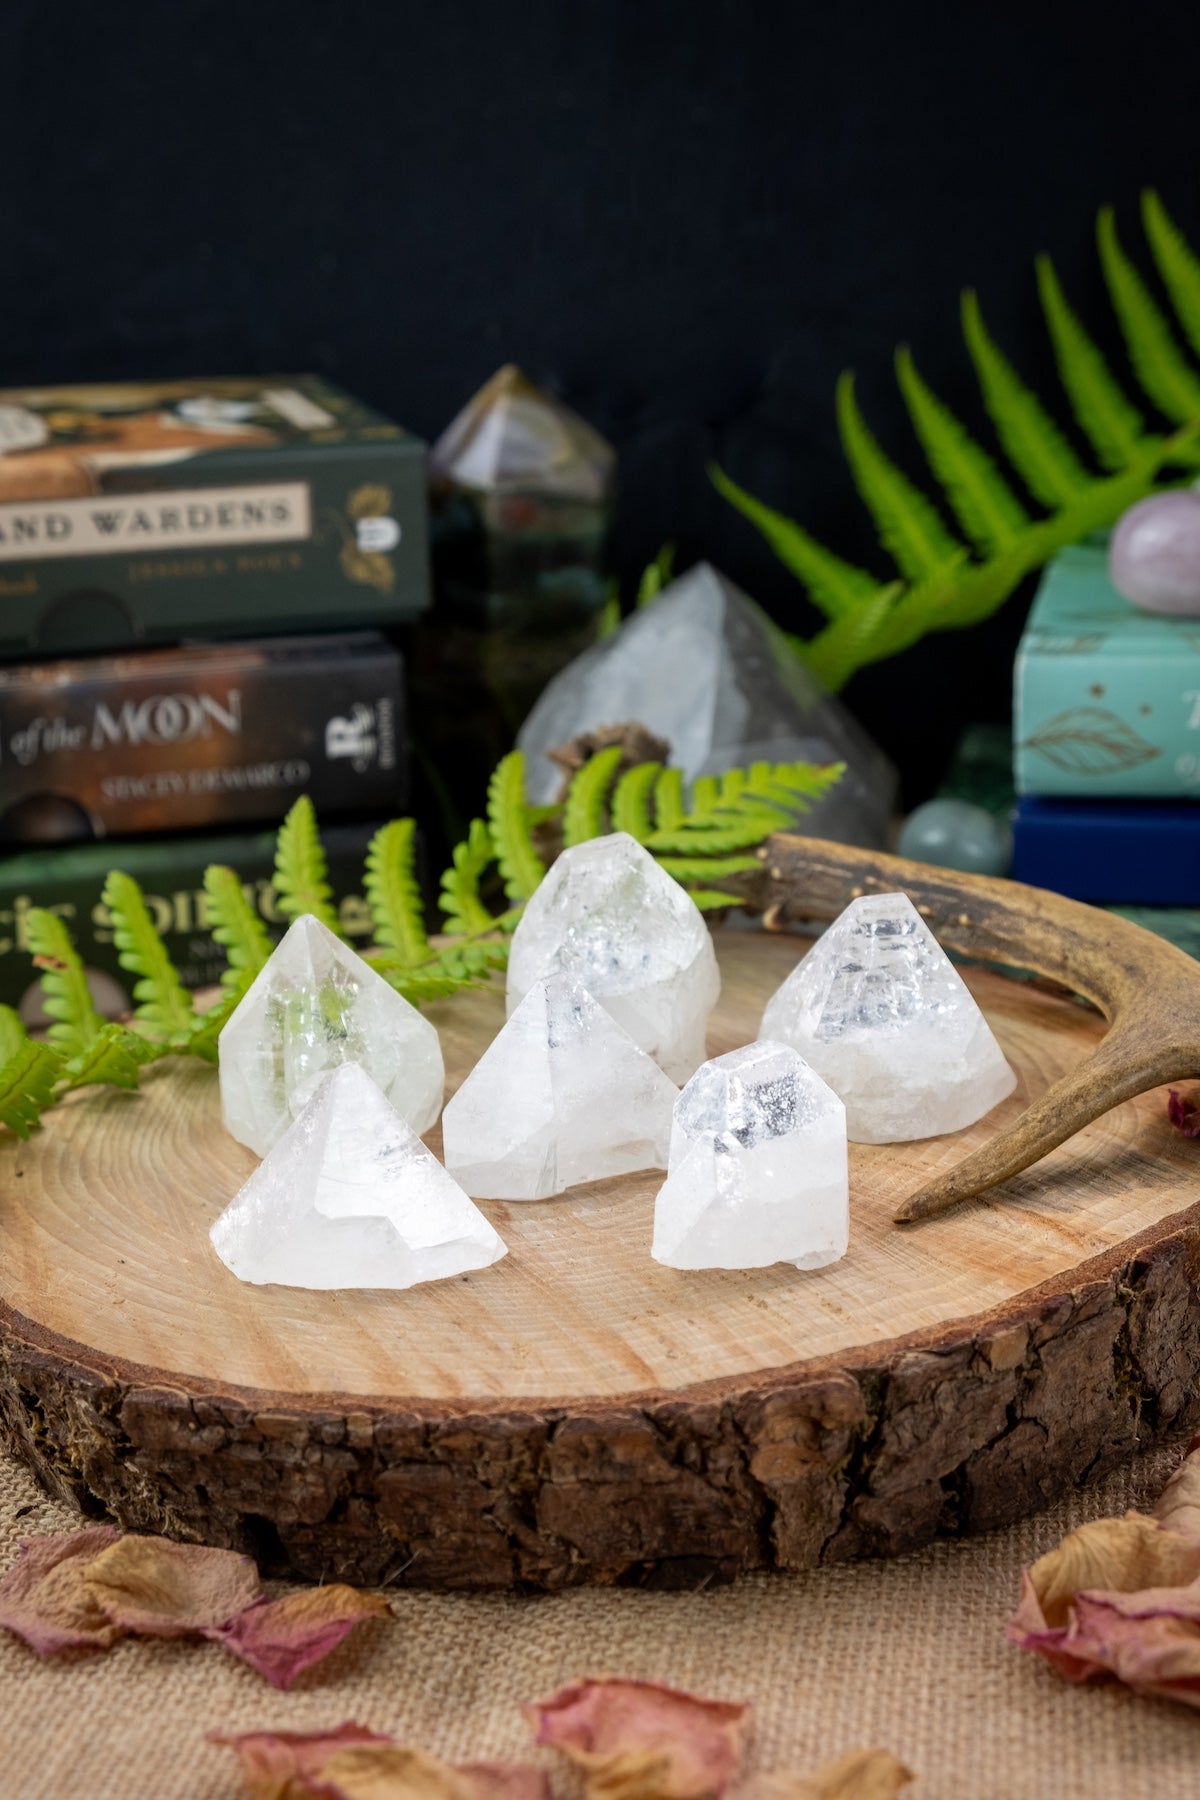 Apophyllite Crystal Point, Absorbs Negative Energy, Crystal grids.